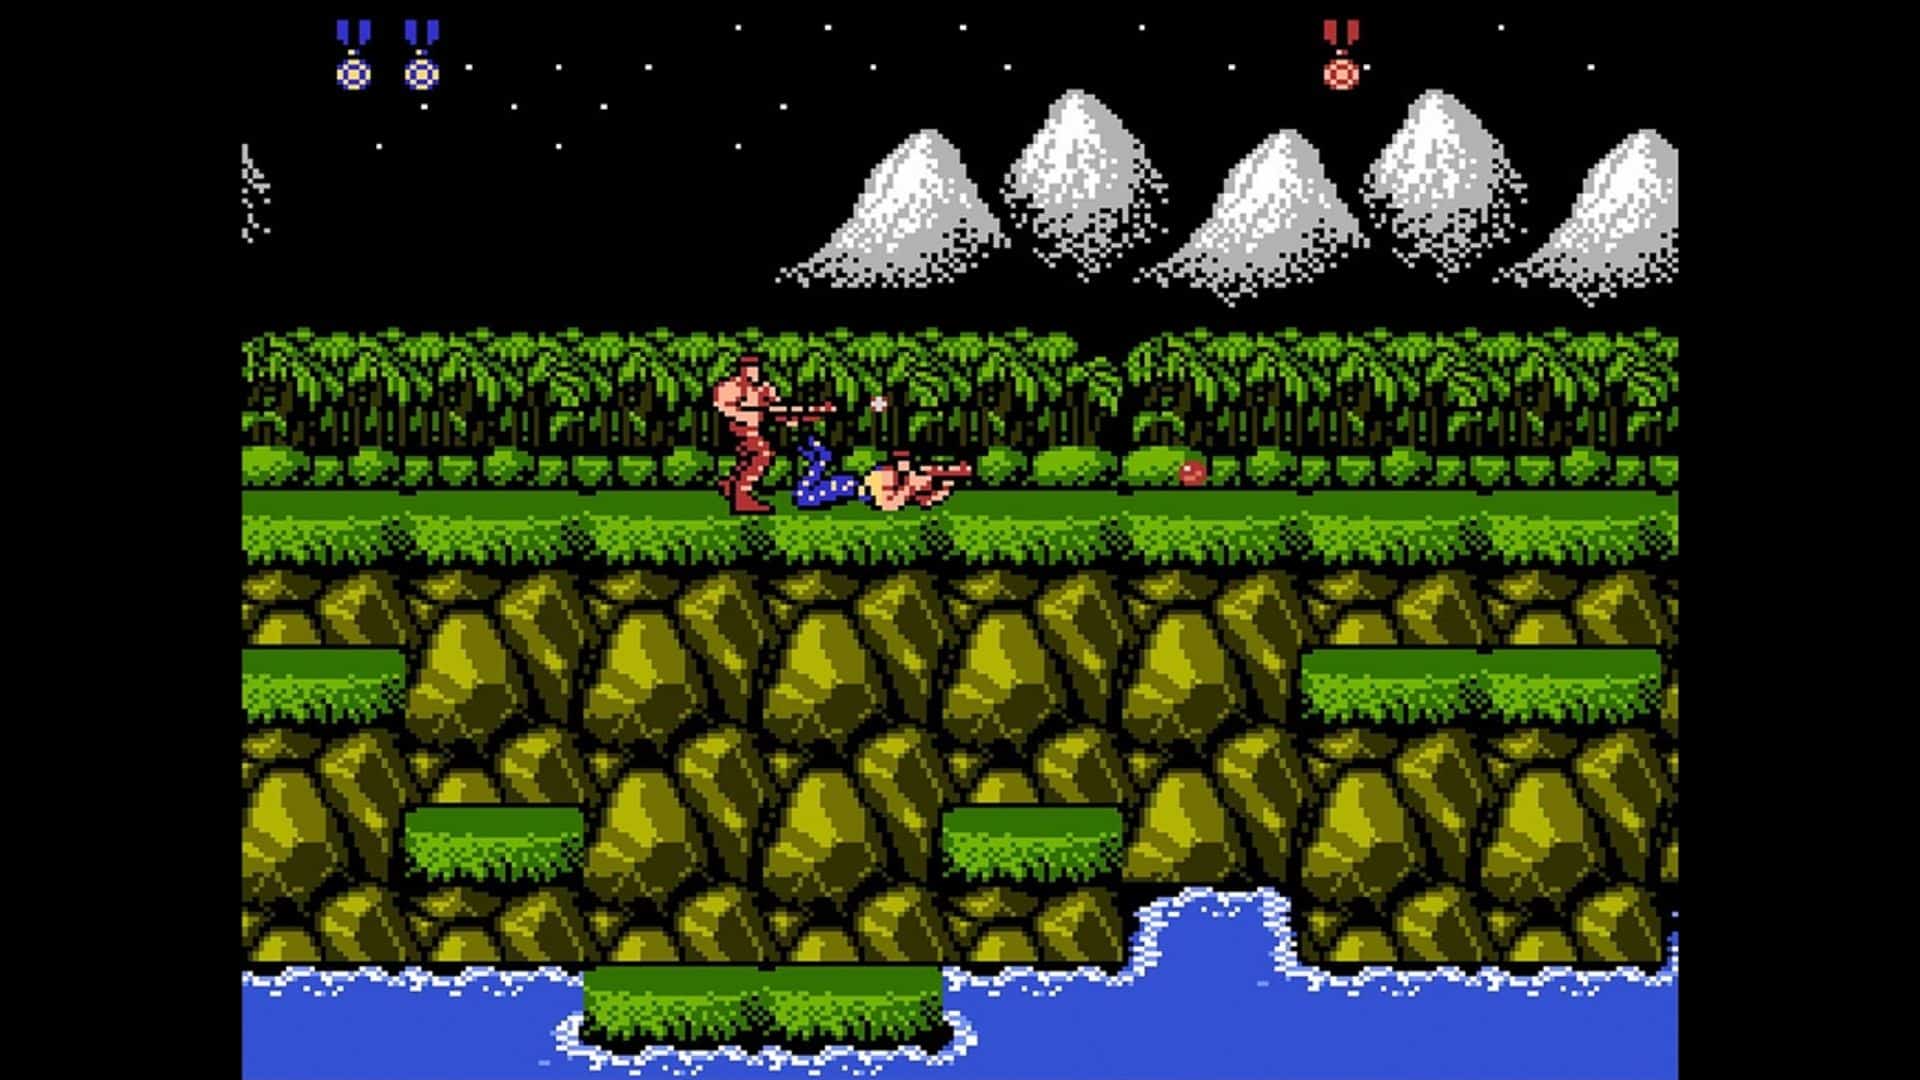 An image of co-op gameplay in Contra, one of the hardest games of all time.